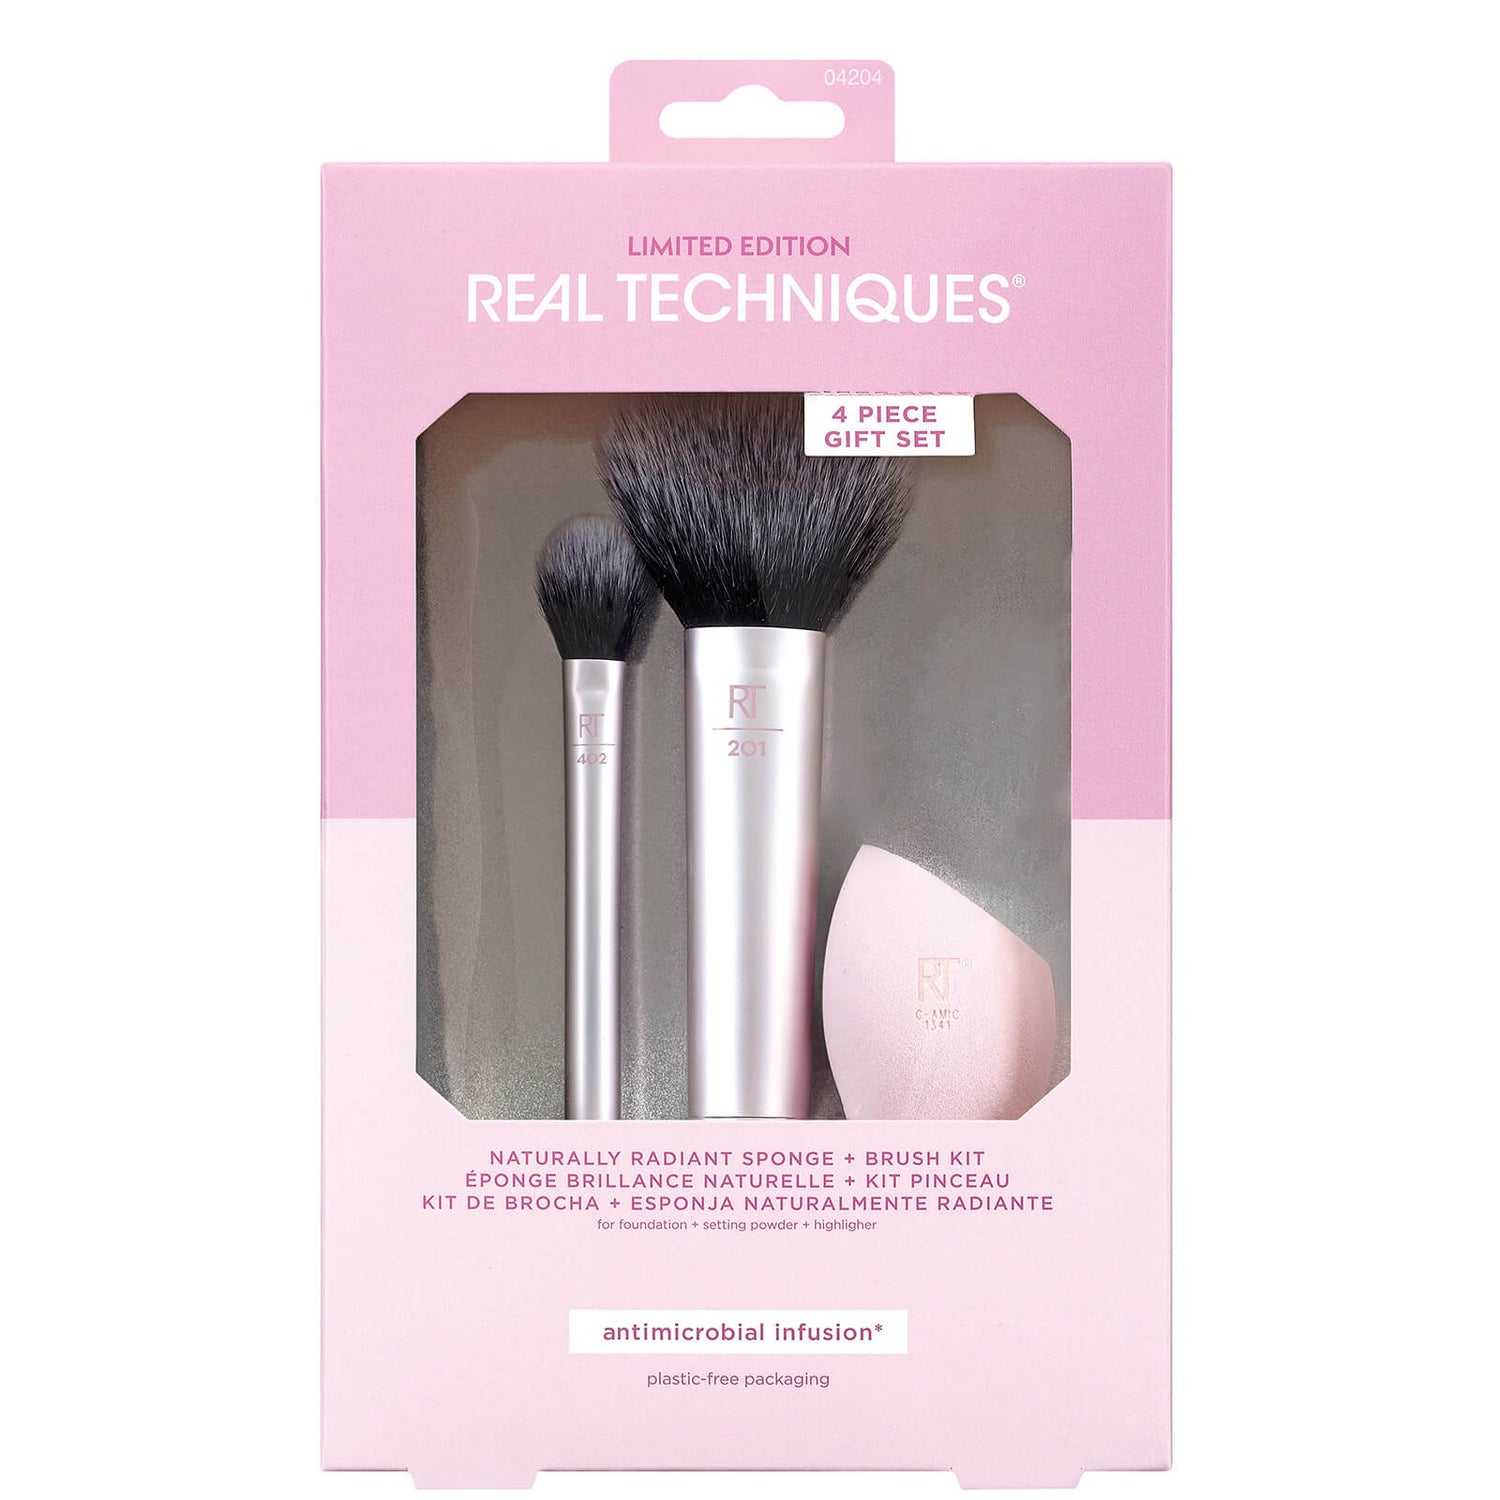 Real Techniques Naturally Radiant Sponge and Brush Kit